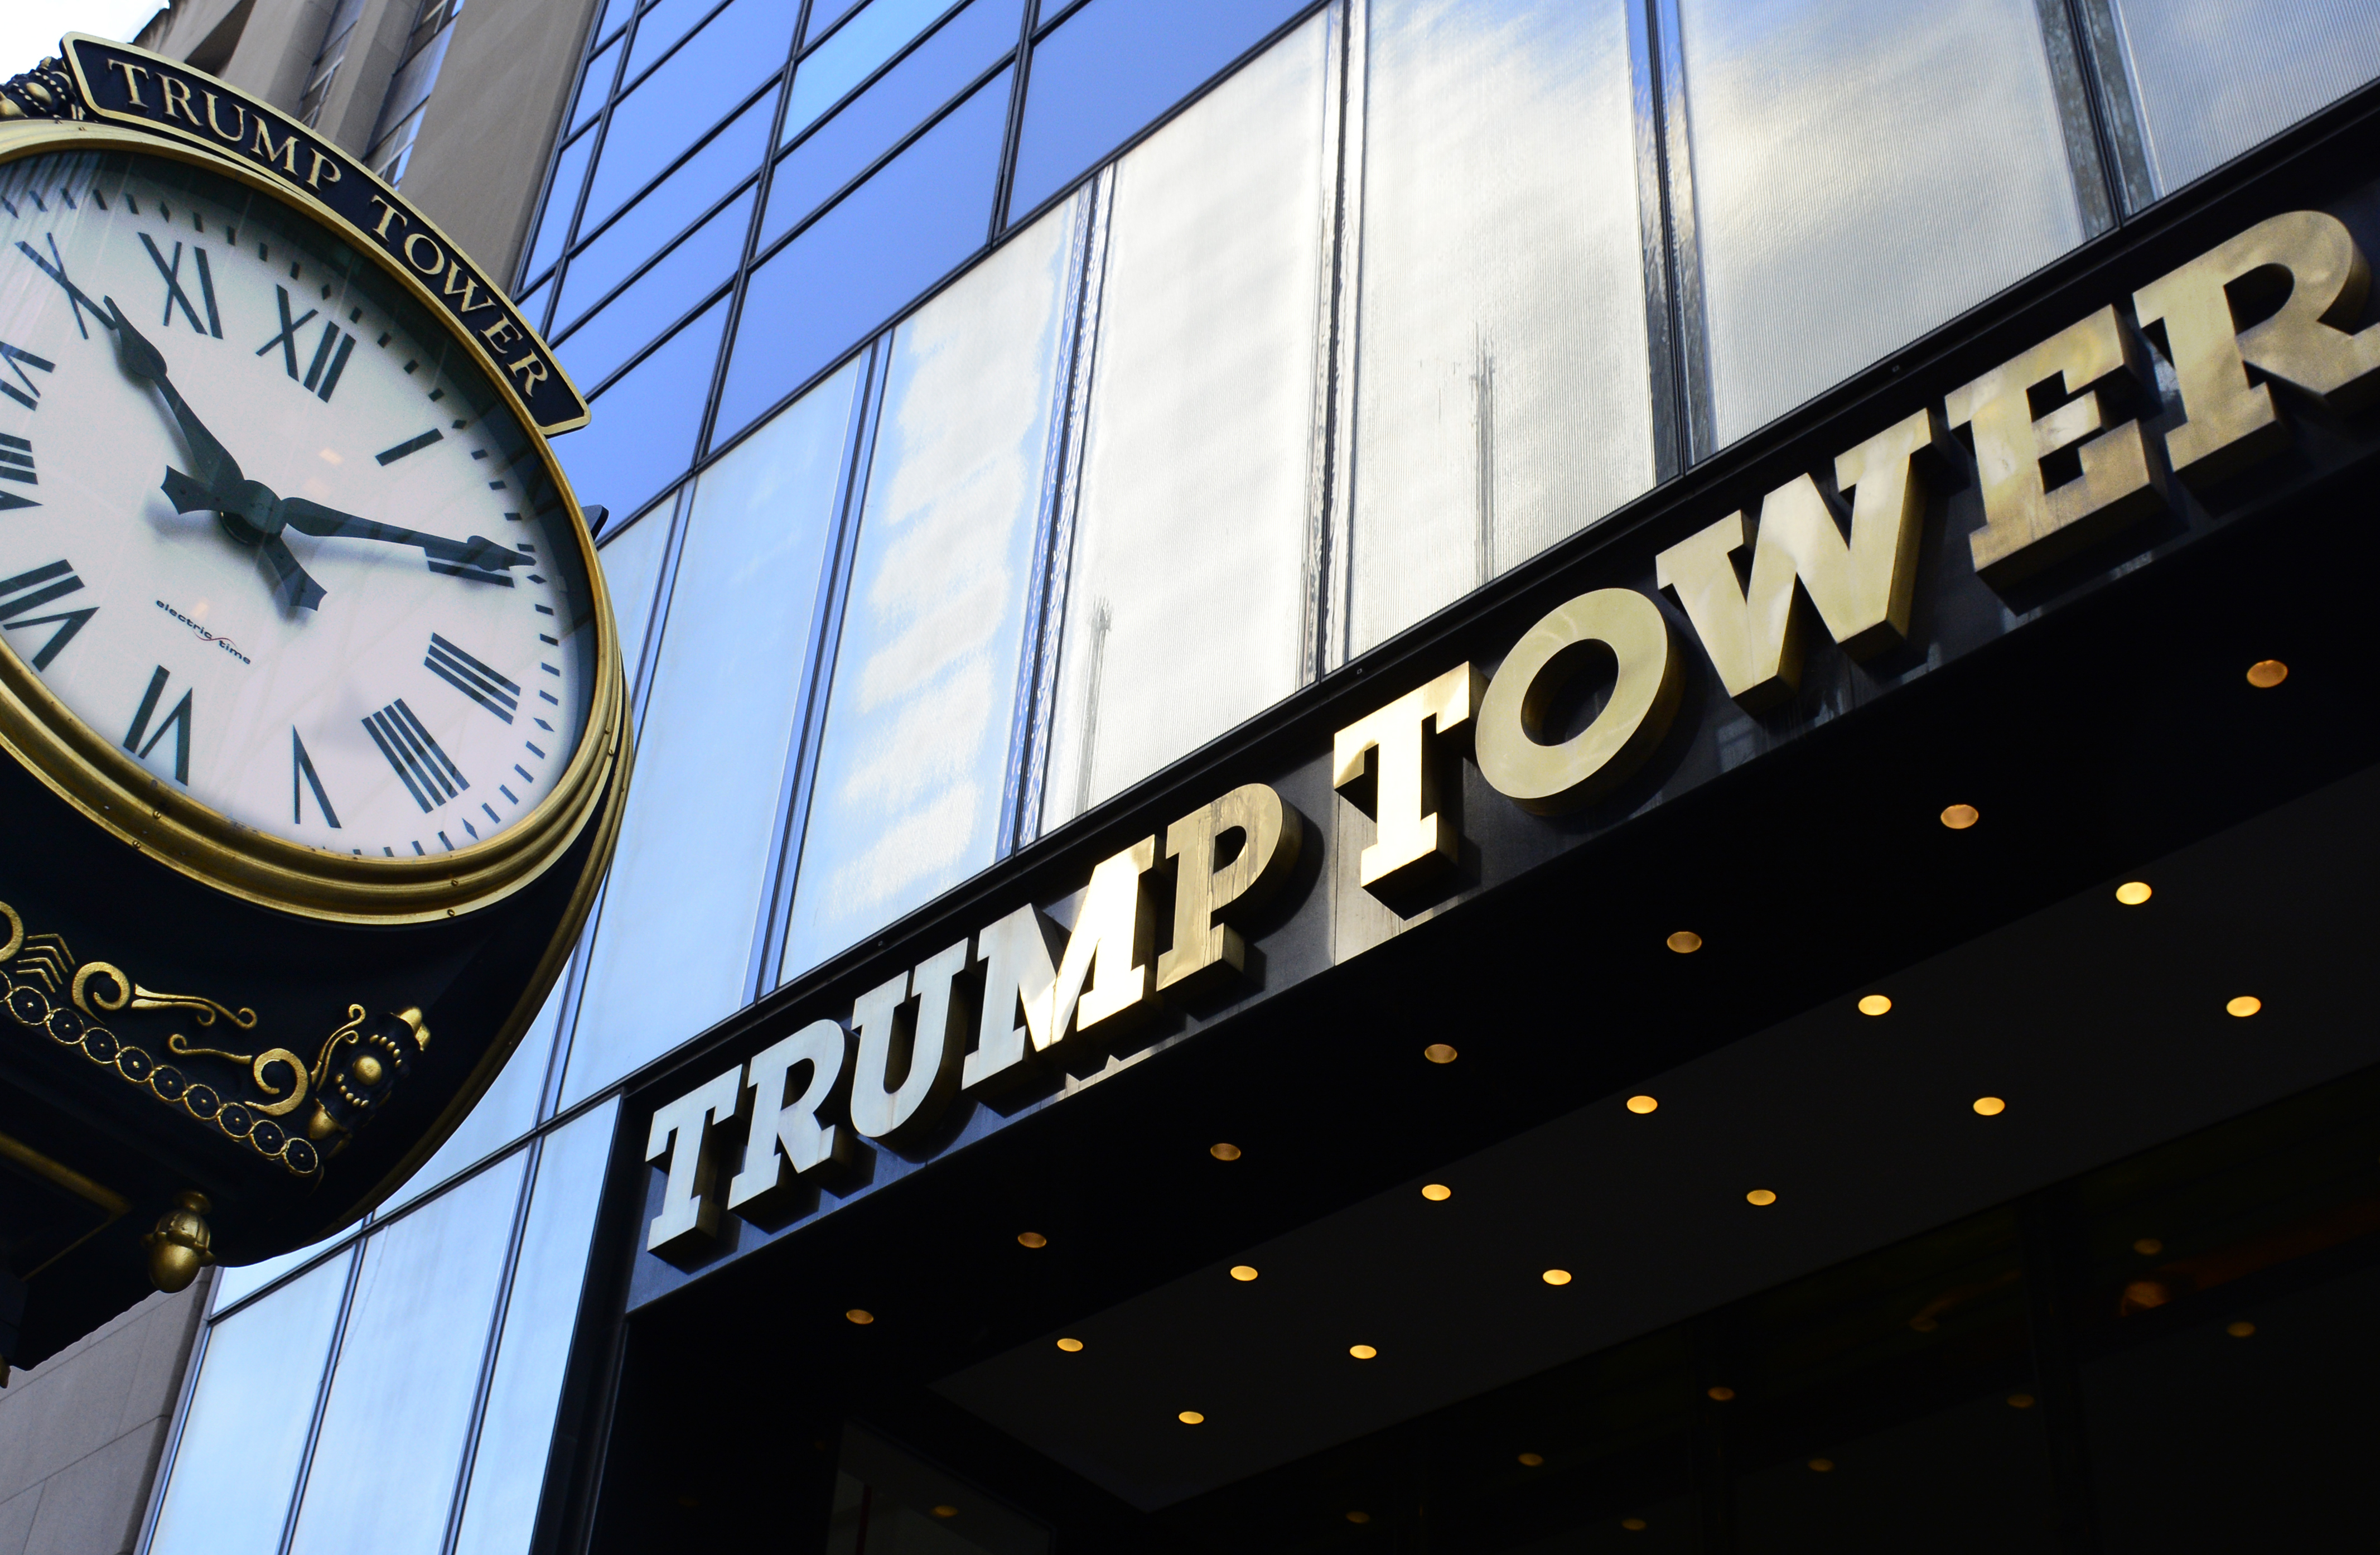 The public Fifth Avenue entrance to Trump Tower on Fifth Avenue in Midtown Manhattan, New York, New York. (Robert Alexander&mdash;Getty Images)